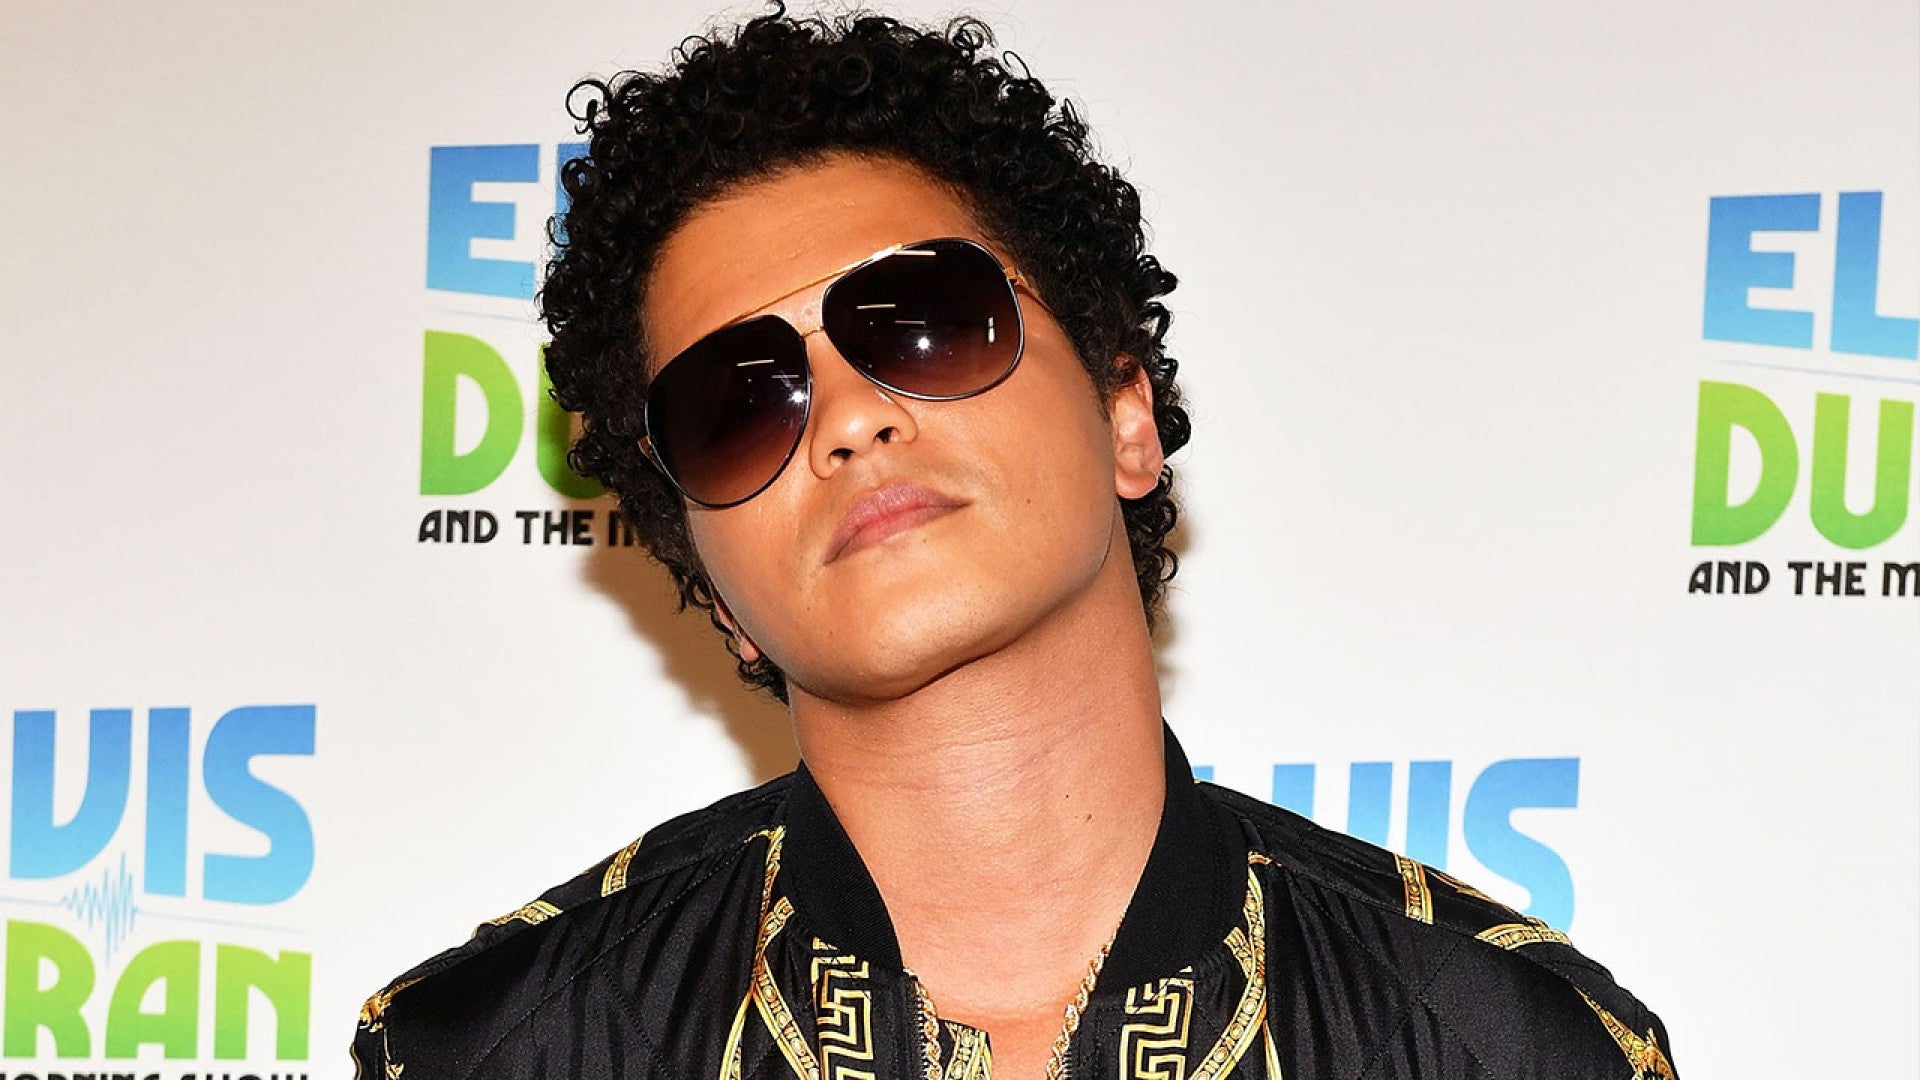 His Hair Is Pompadour Perfection  16 Reasons Bruno Mars Is Beautiful Just  the Way He Is  POPSUGAR Latina Photo 15